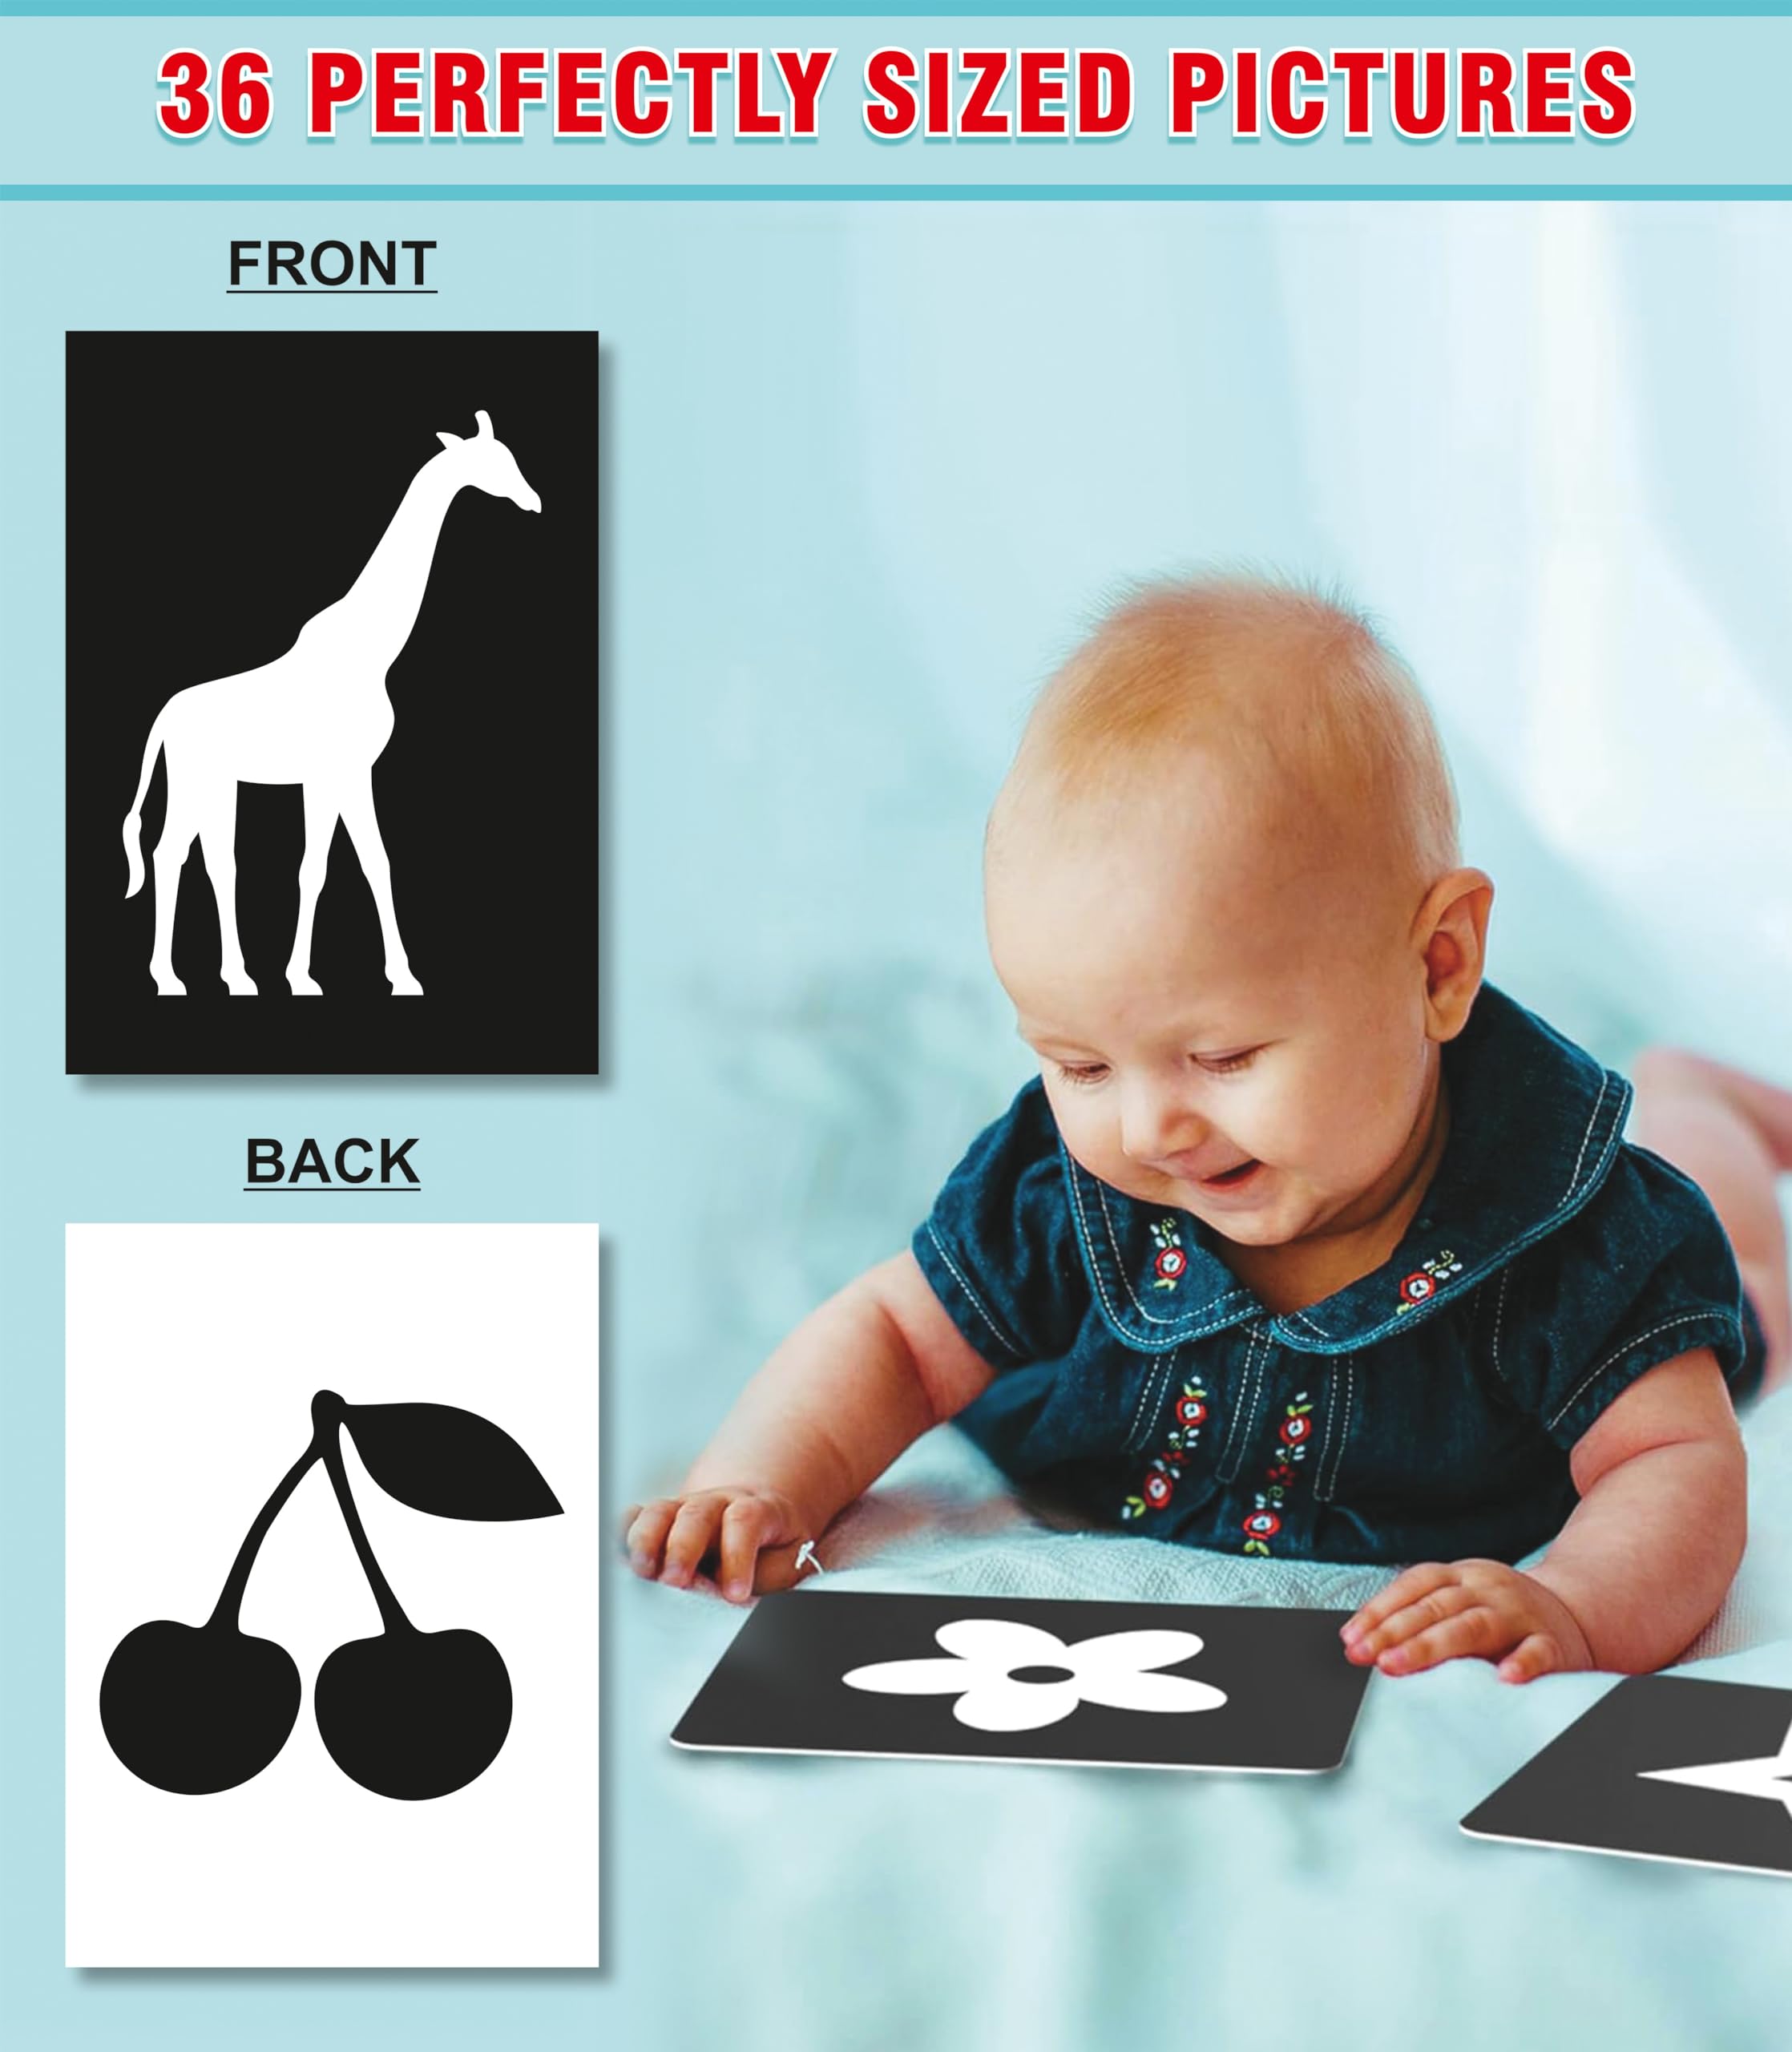 Gurukanth® Premium High Contrast Flash Cards for New Born Children - Black & White | 36 Objects | Age Group: 0-1 Year | Visual Stimulation and Sensory Development for Infants